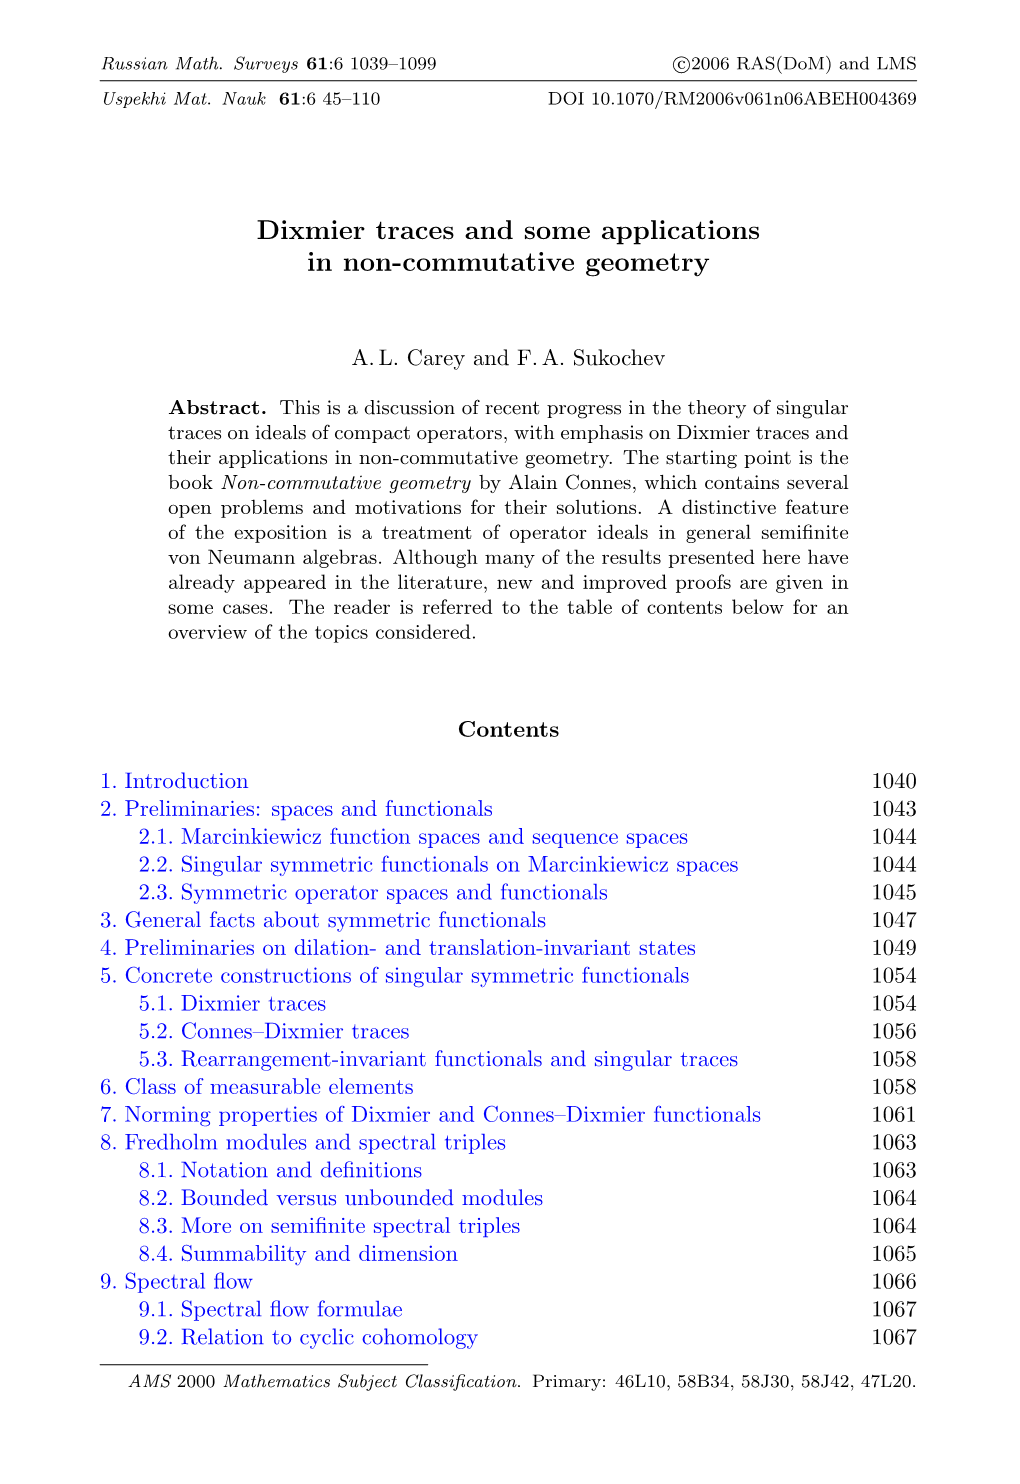 Dixmier Traces and Some Applications in Non-Commutative Geometry